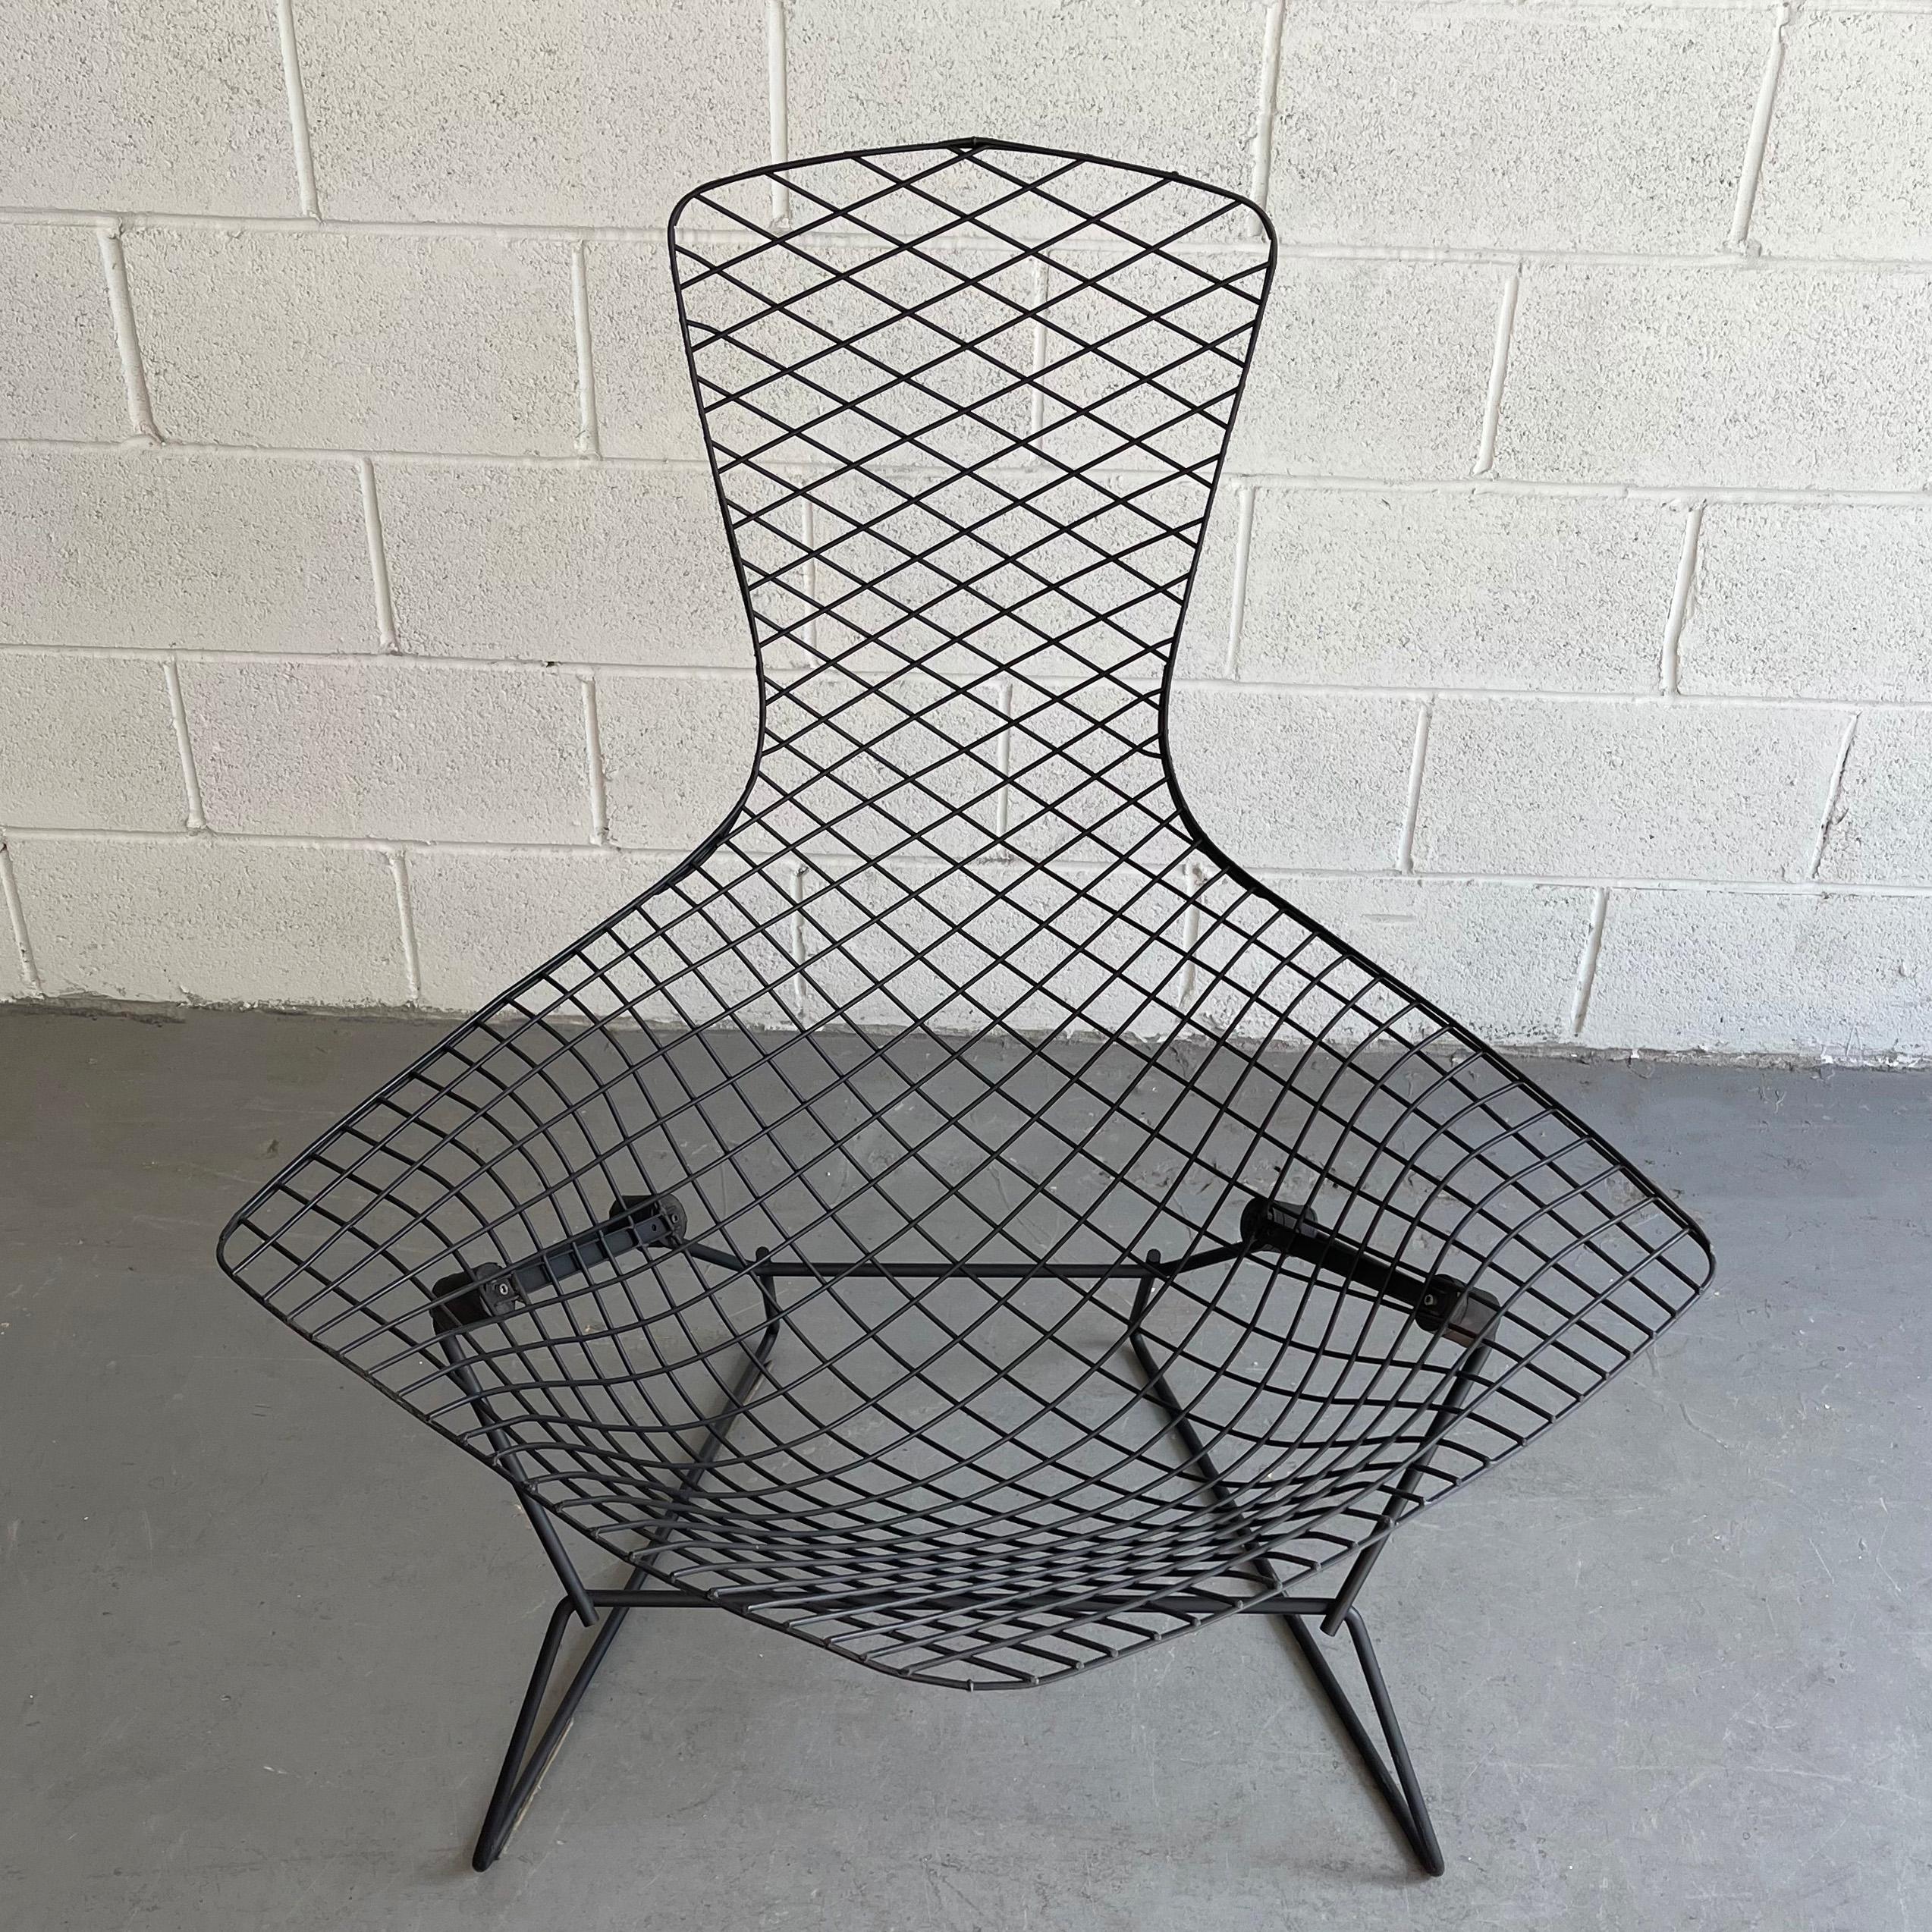 Powder-Coated Bird Lounge Chair with Ottoman by Harry Bertoia for Knoll